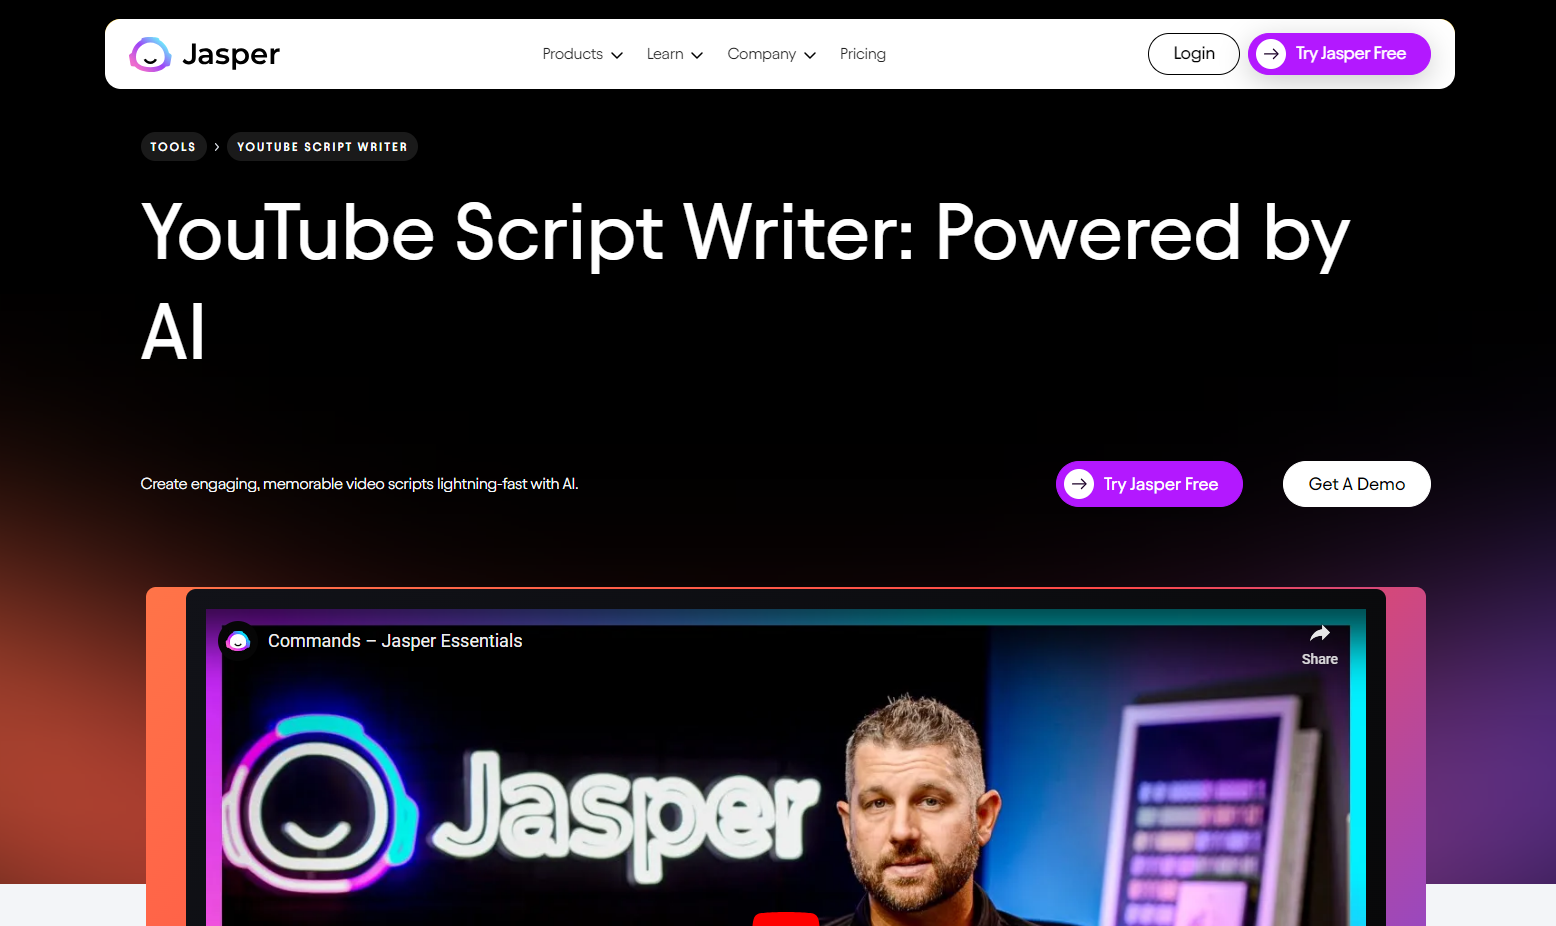 This is an image showing Jasper AI, a video script creation tool 